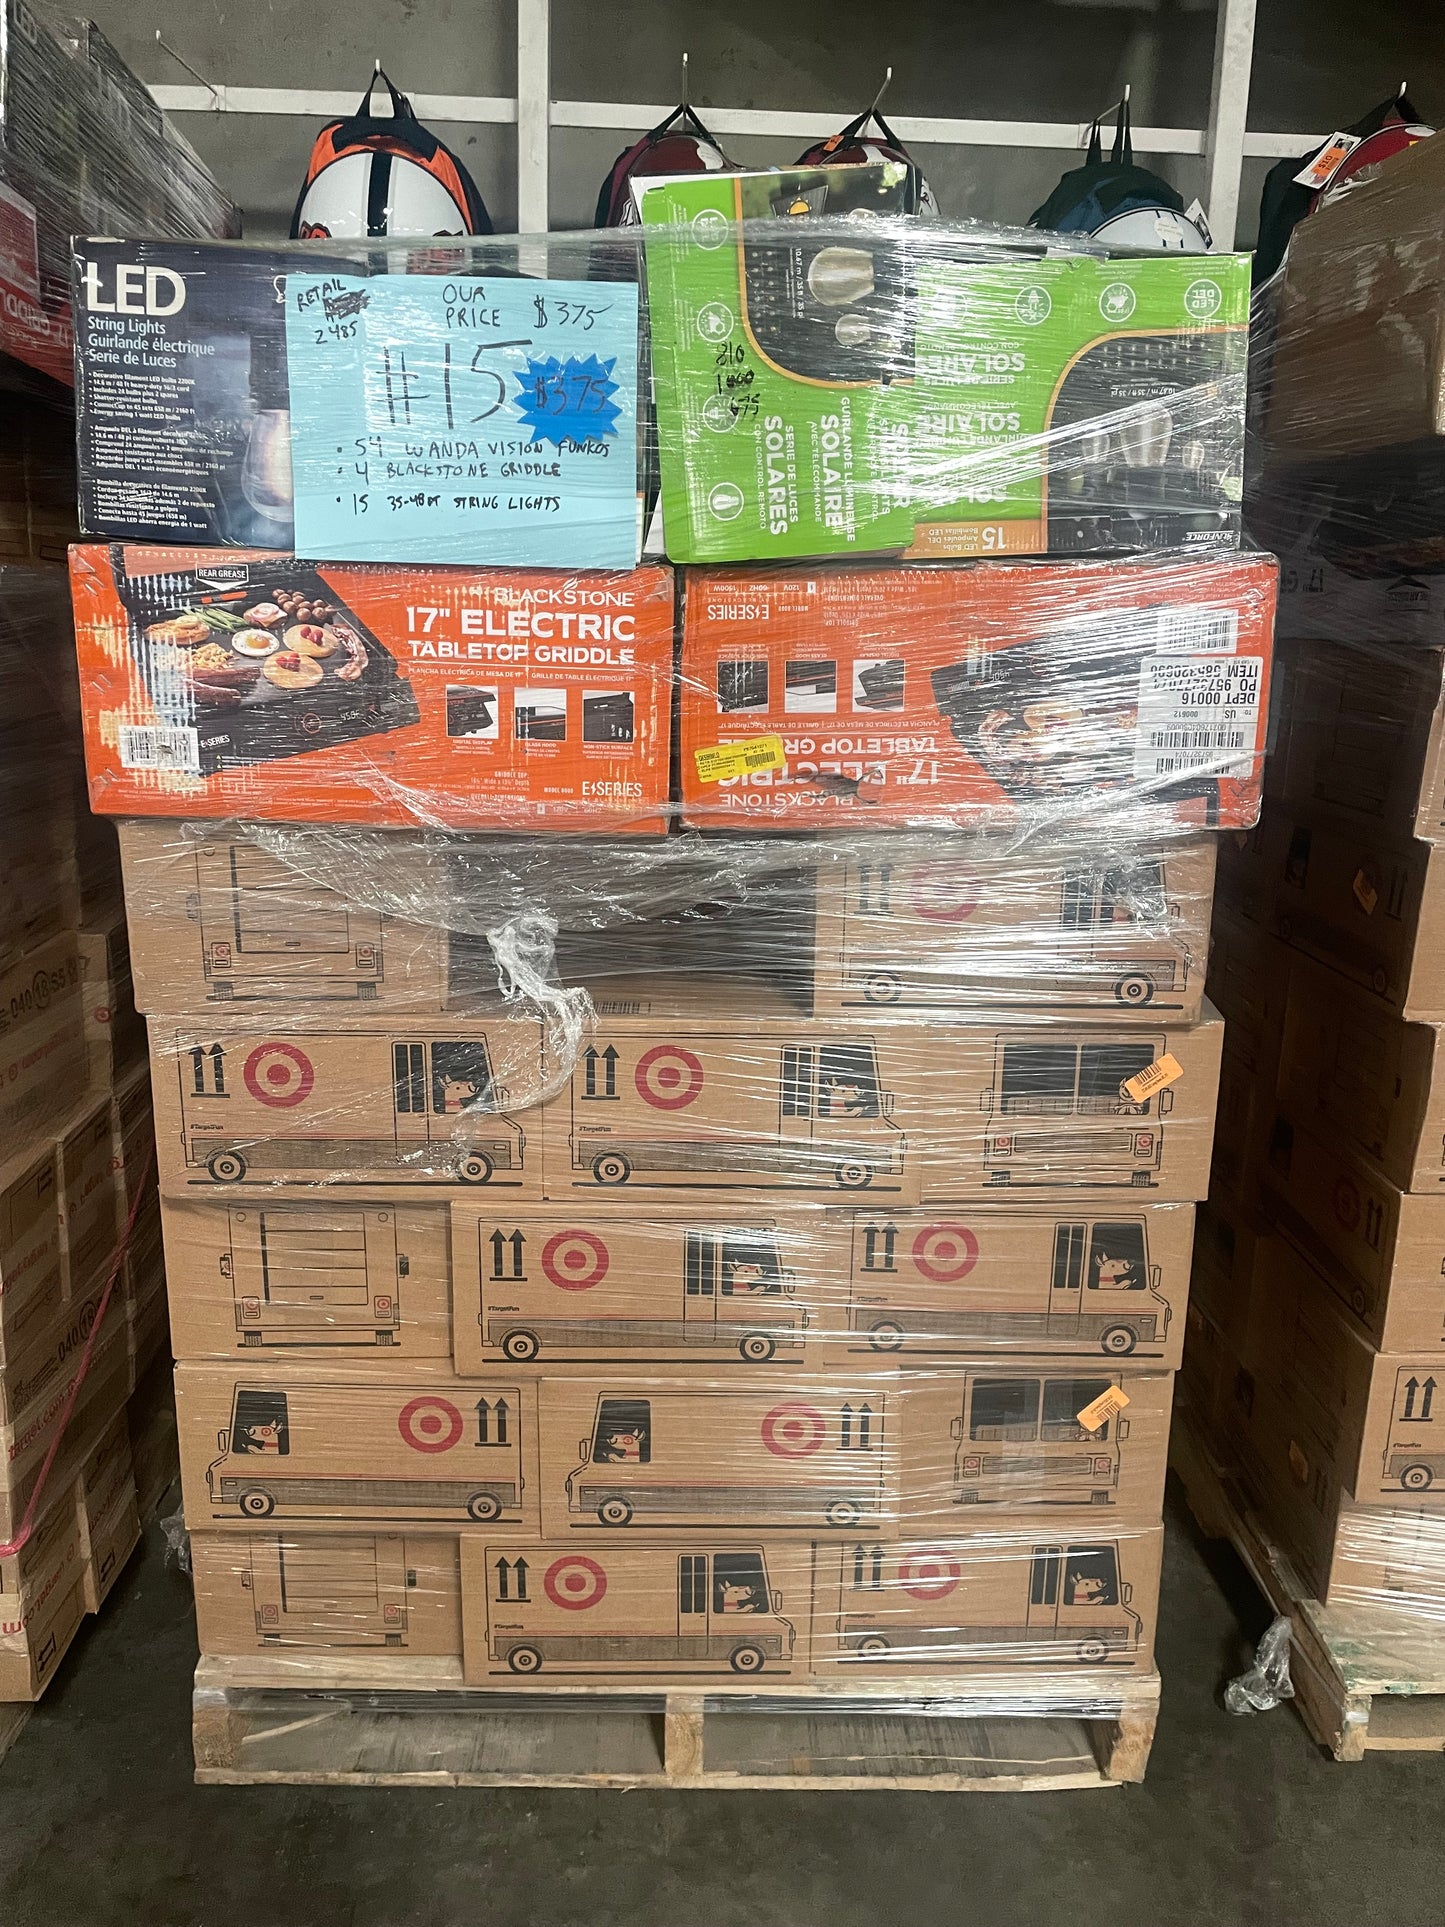 LOT #15 Mix of Blackstone Griddles, Funko Pop, Costco String Lights (Retail $2485) Pickup Only